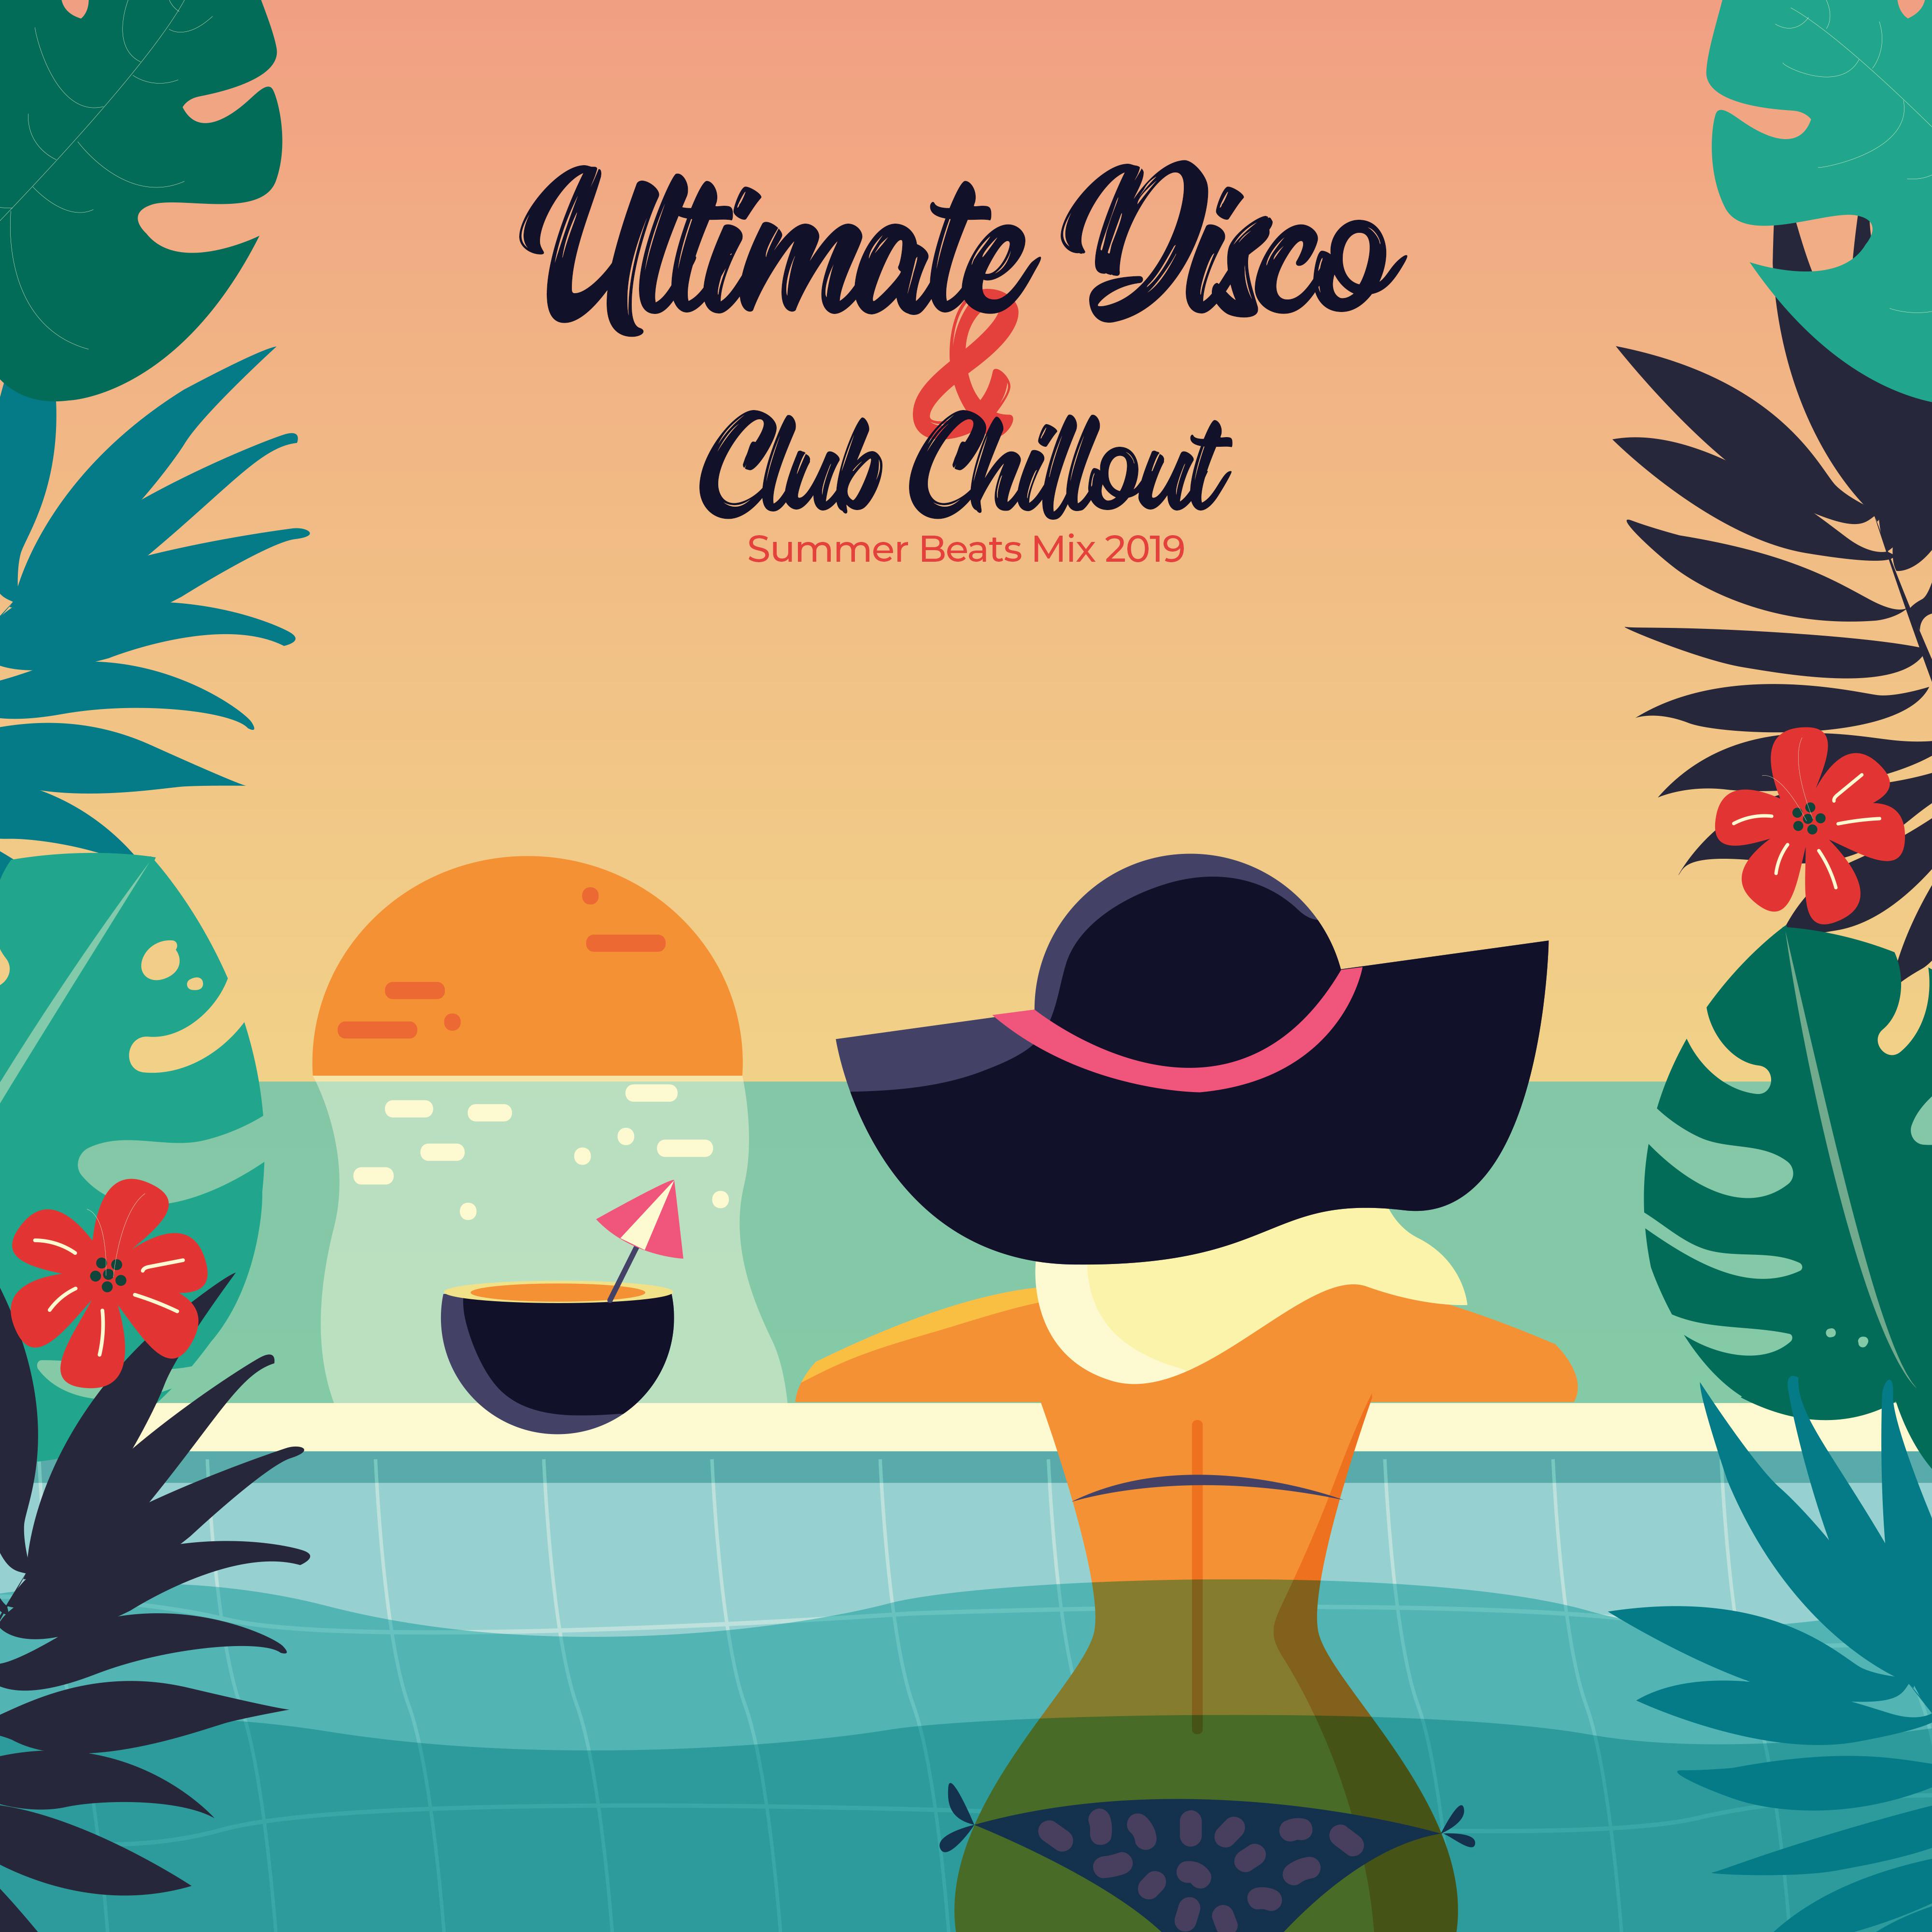 Ultimate Disco & Club Chillout Summer Beats Mix 2019